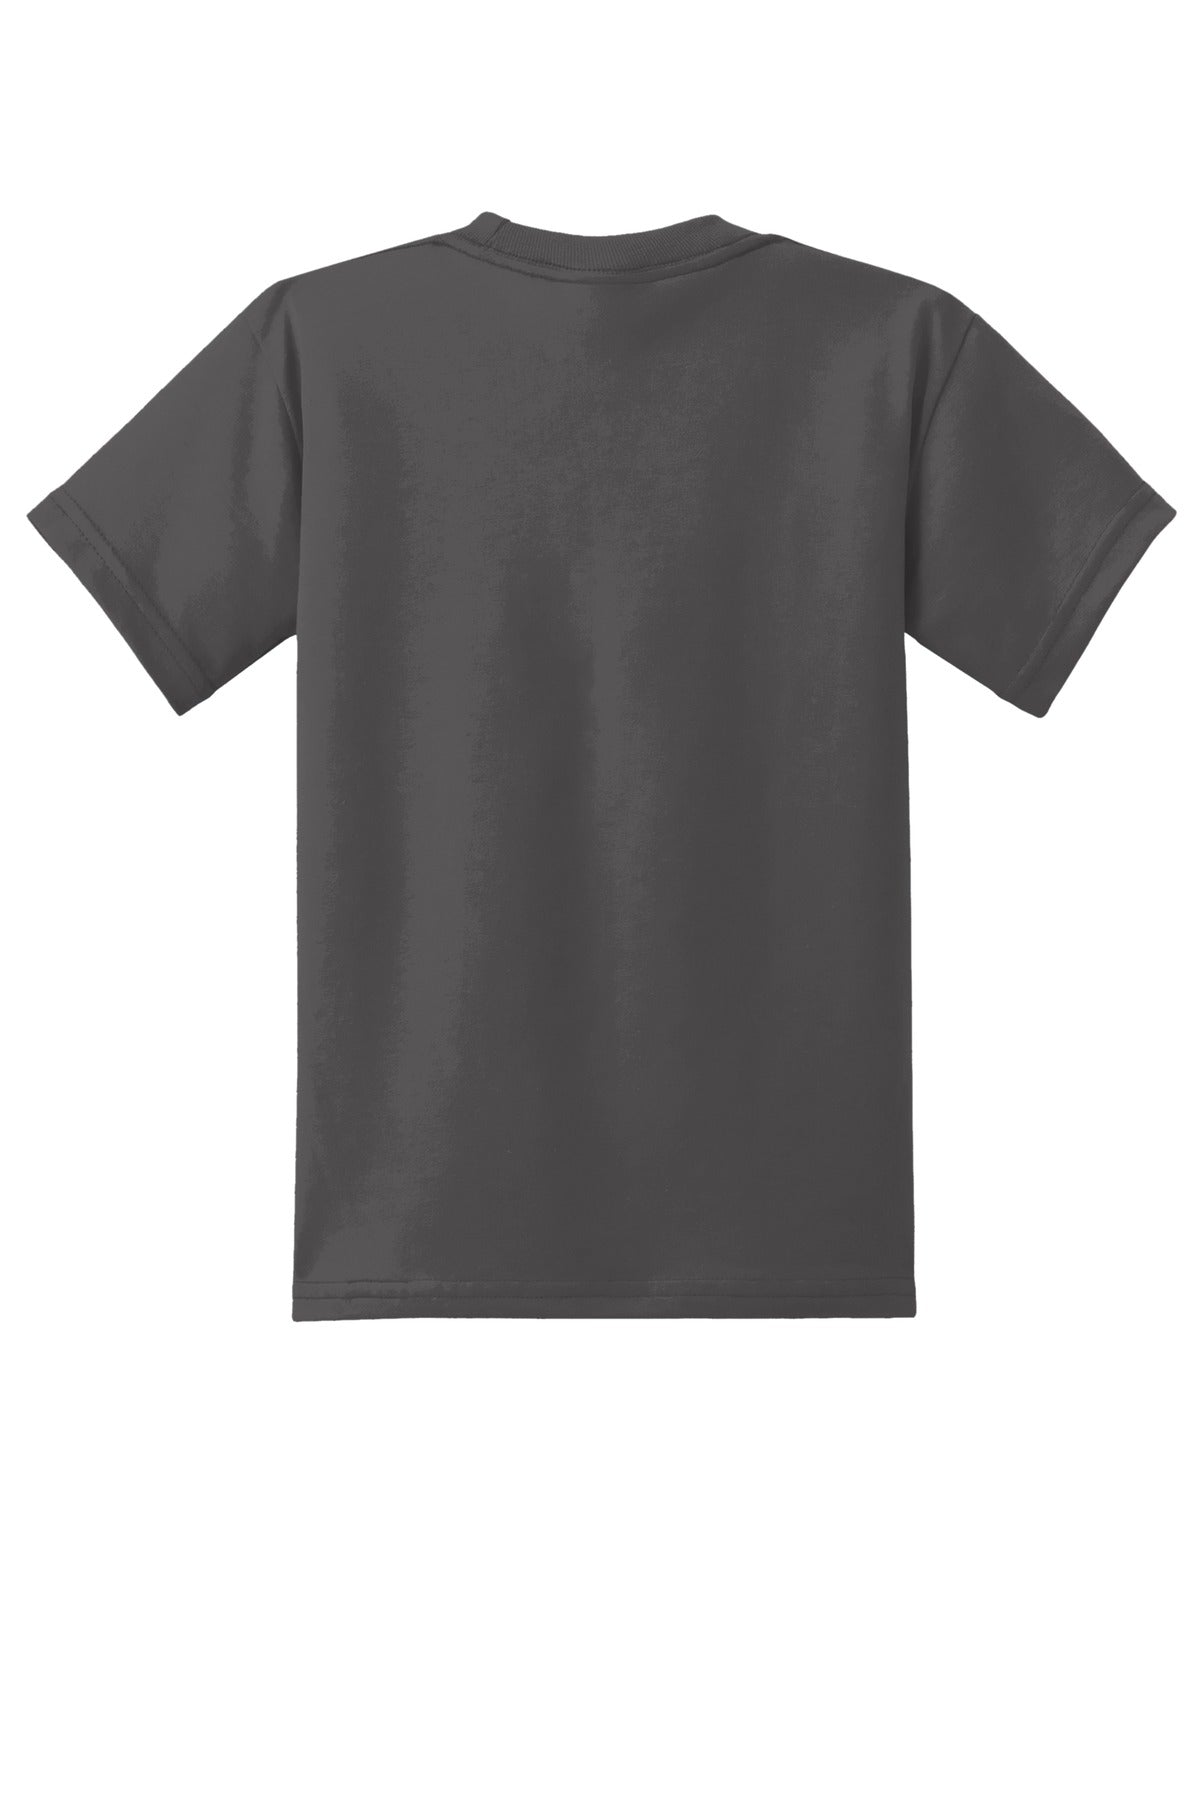 Port & Company - Youth Core Blend Tee. PC55Y